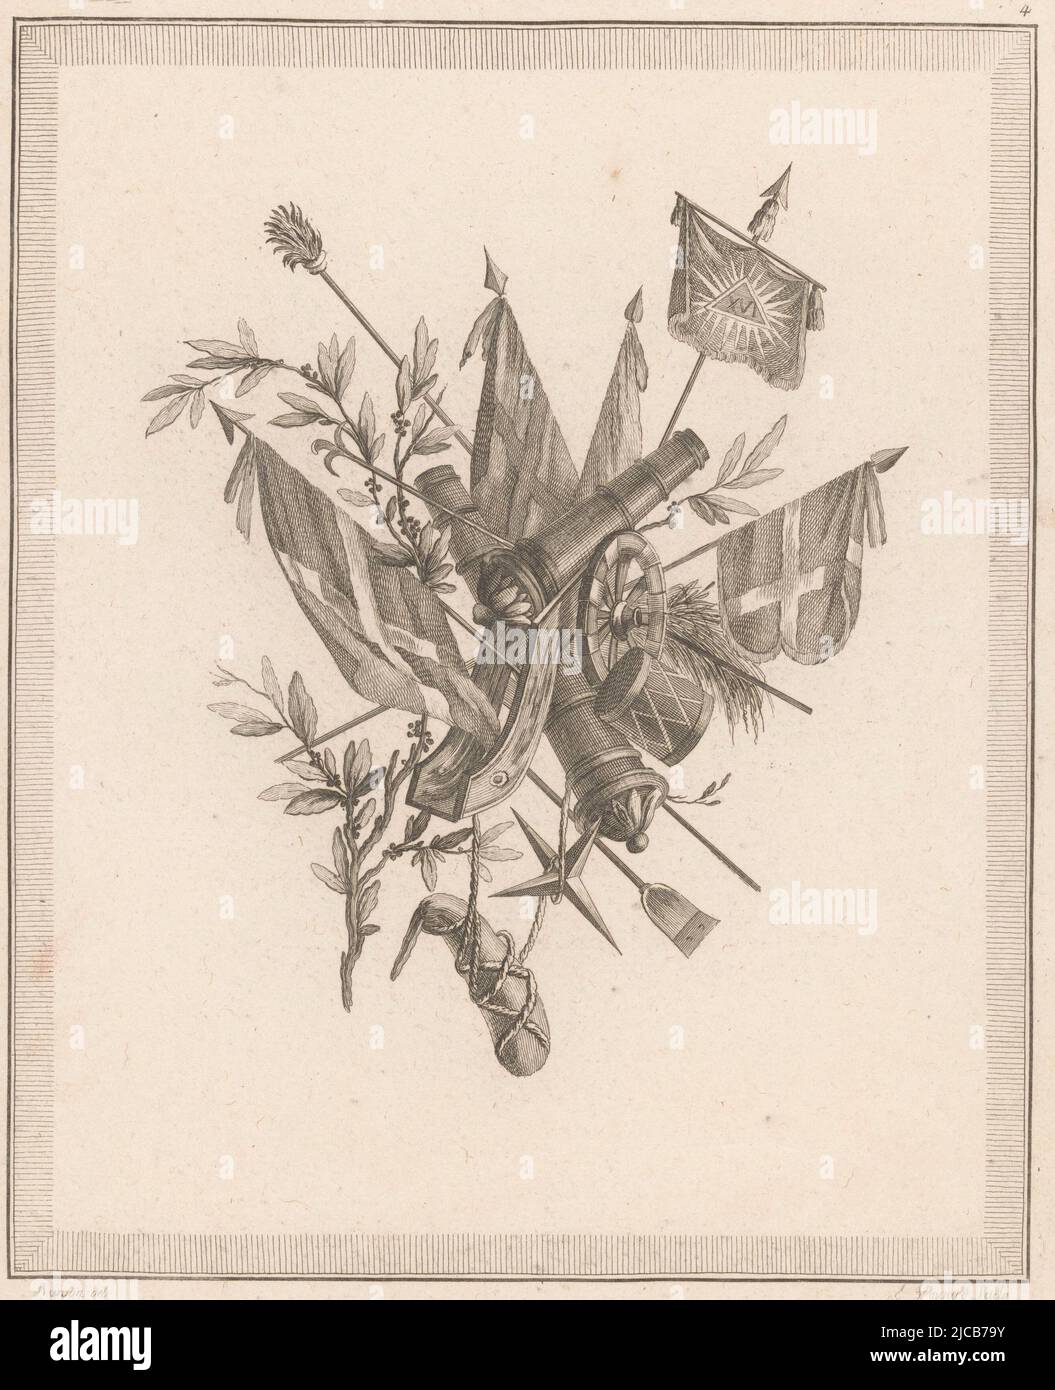 An armorial trophy with flags and cannons, Armorial Trophy 3rd Cahier de Troph, print maker: Etienne Claude Voysard, (mentioned on object), intermediary draughtsman: Pierre Ranson, (mentioned on object), publisher: Esnauts & Rapilly, Paris, 1778, paper, etching, h 283 mm × w 220 mm Stock Photo